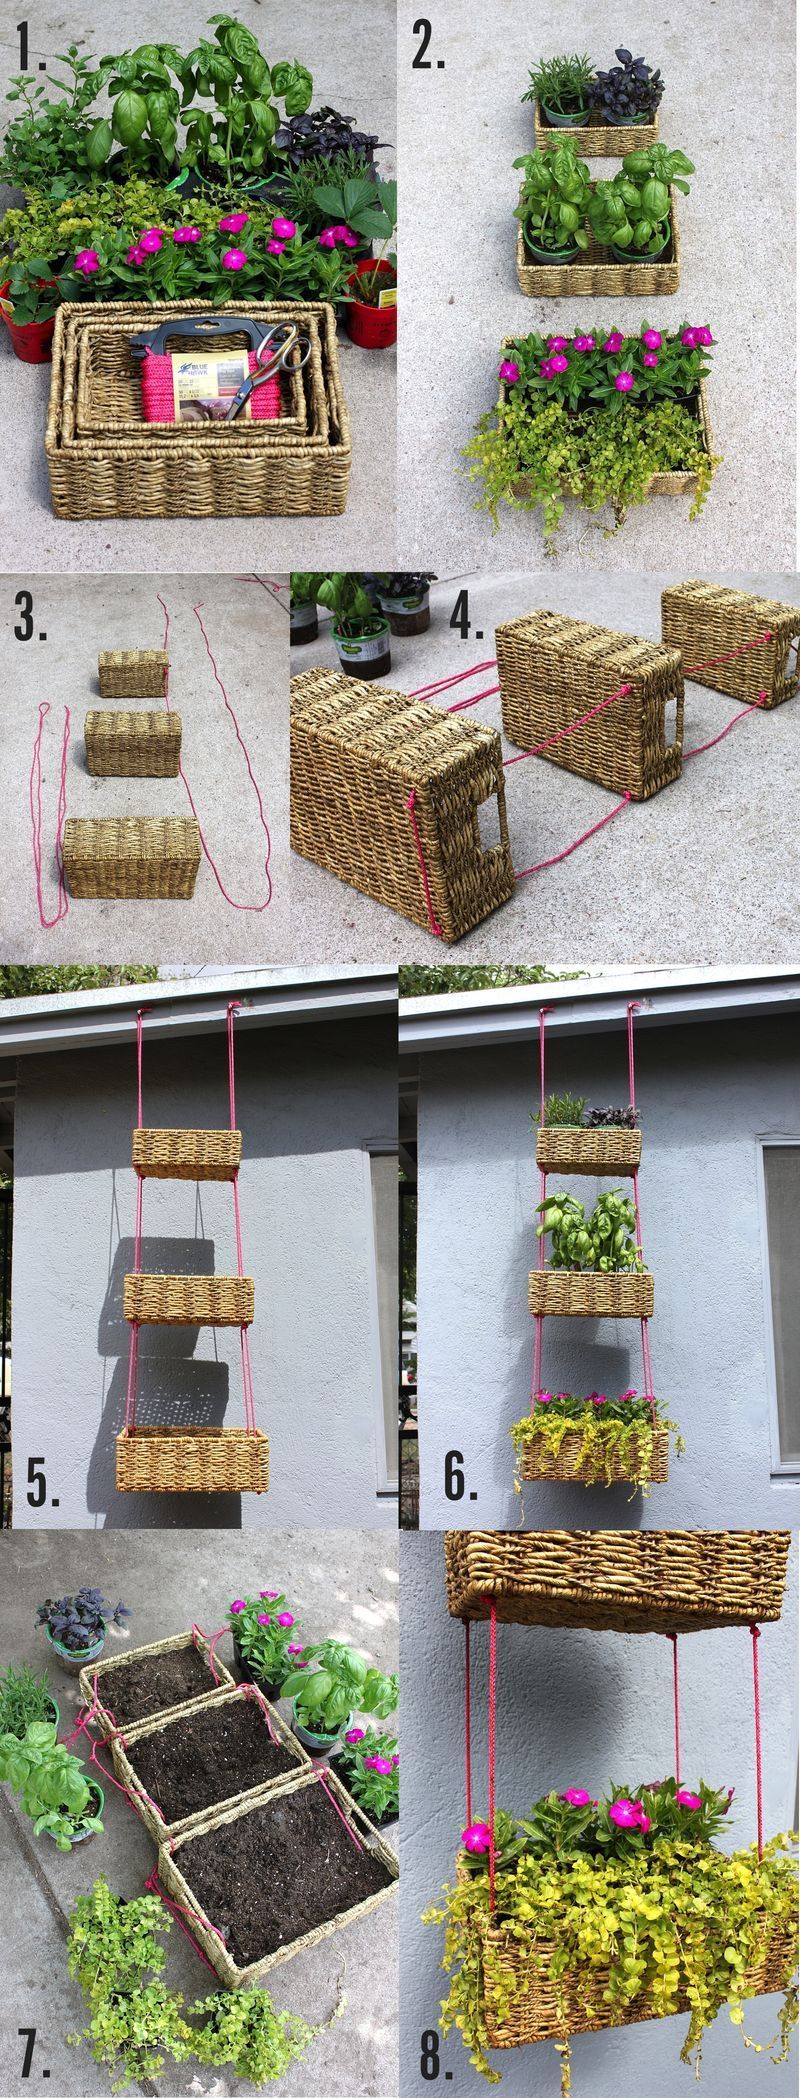 Hanging Basket Garden DIY – A Beautiful Mess. They show this for planters but I